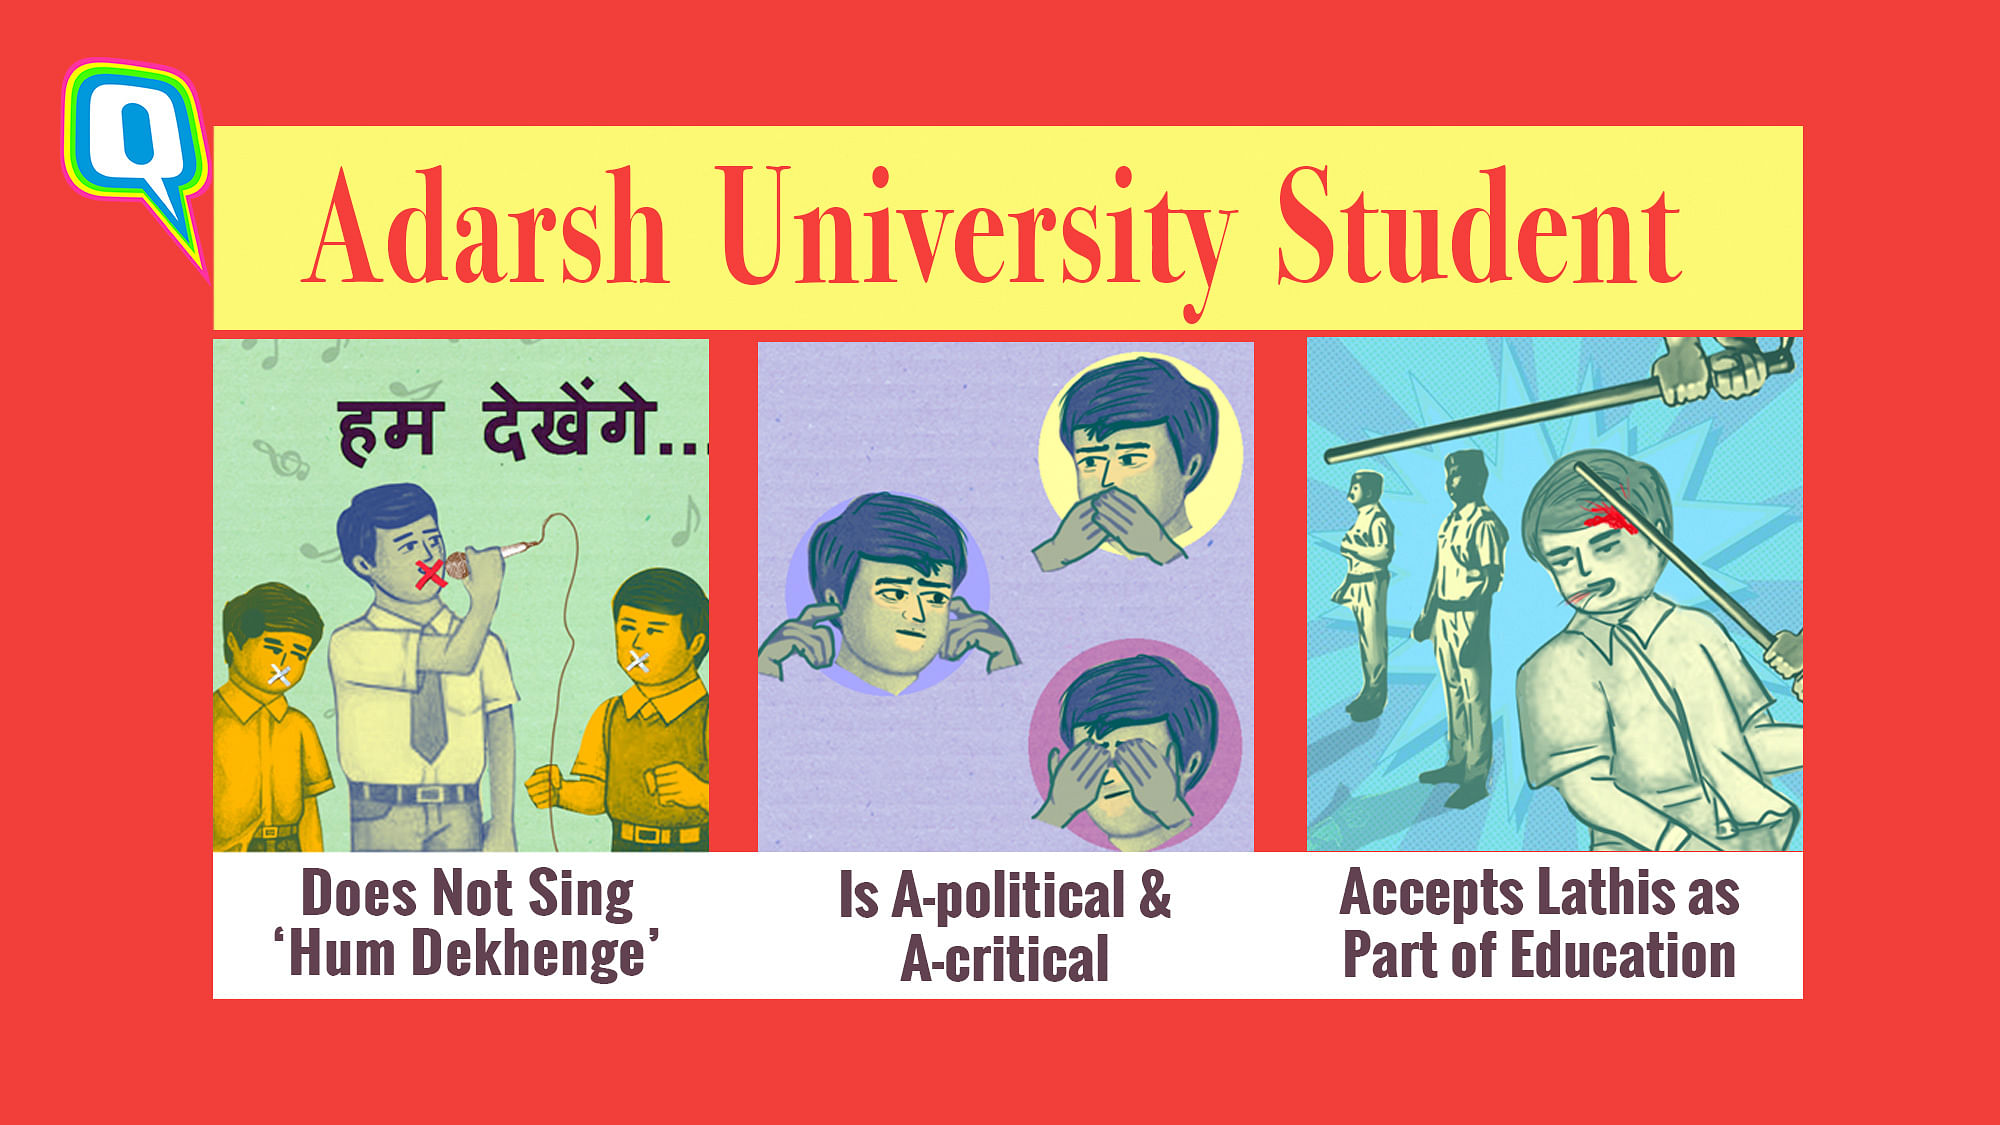 Find out if you are an adarsh student in times of the anti-CAA-NRC protests.